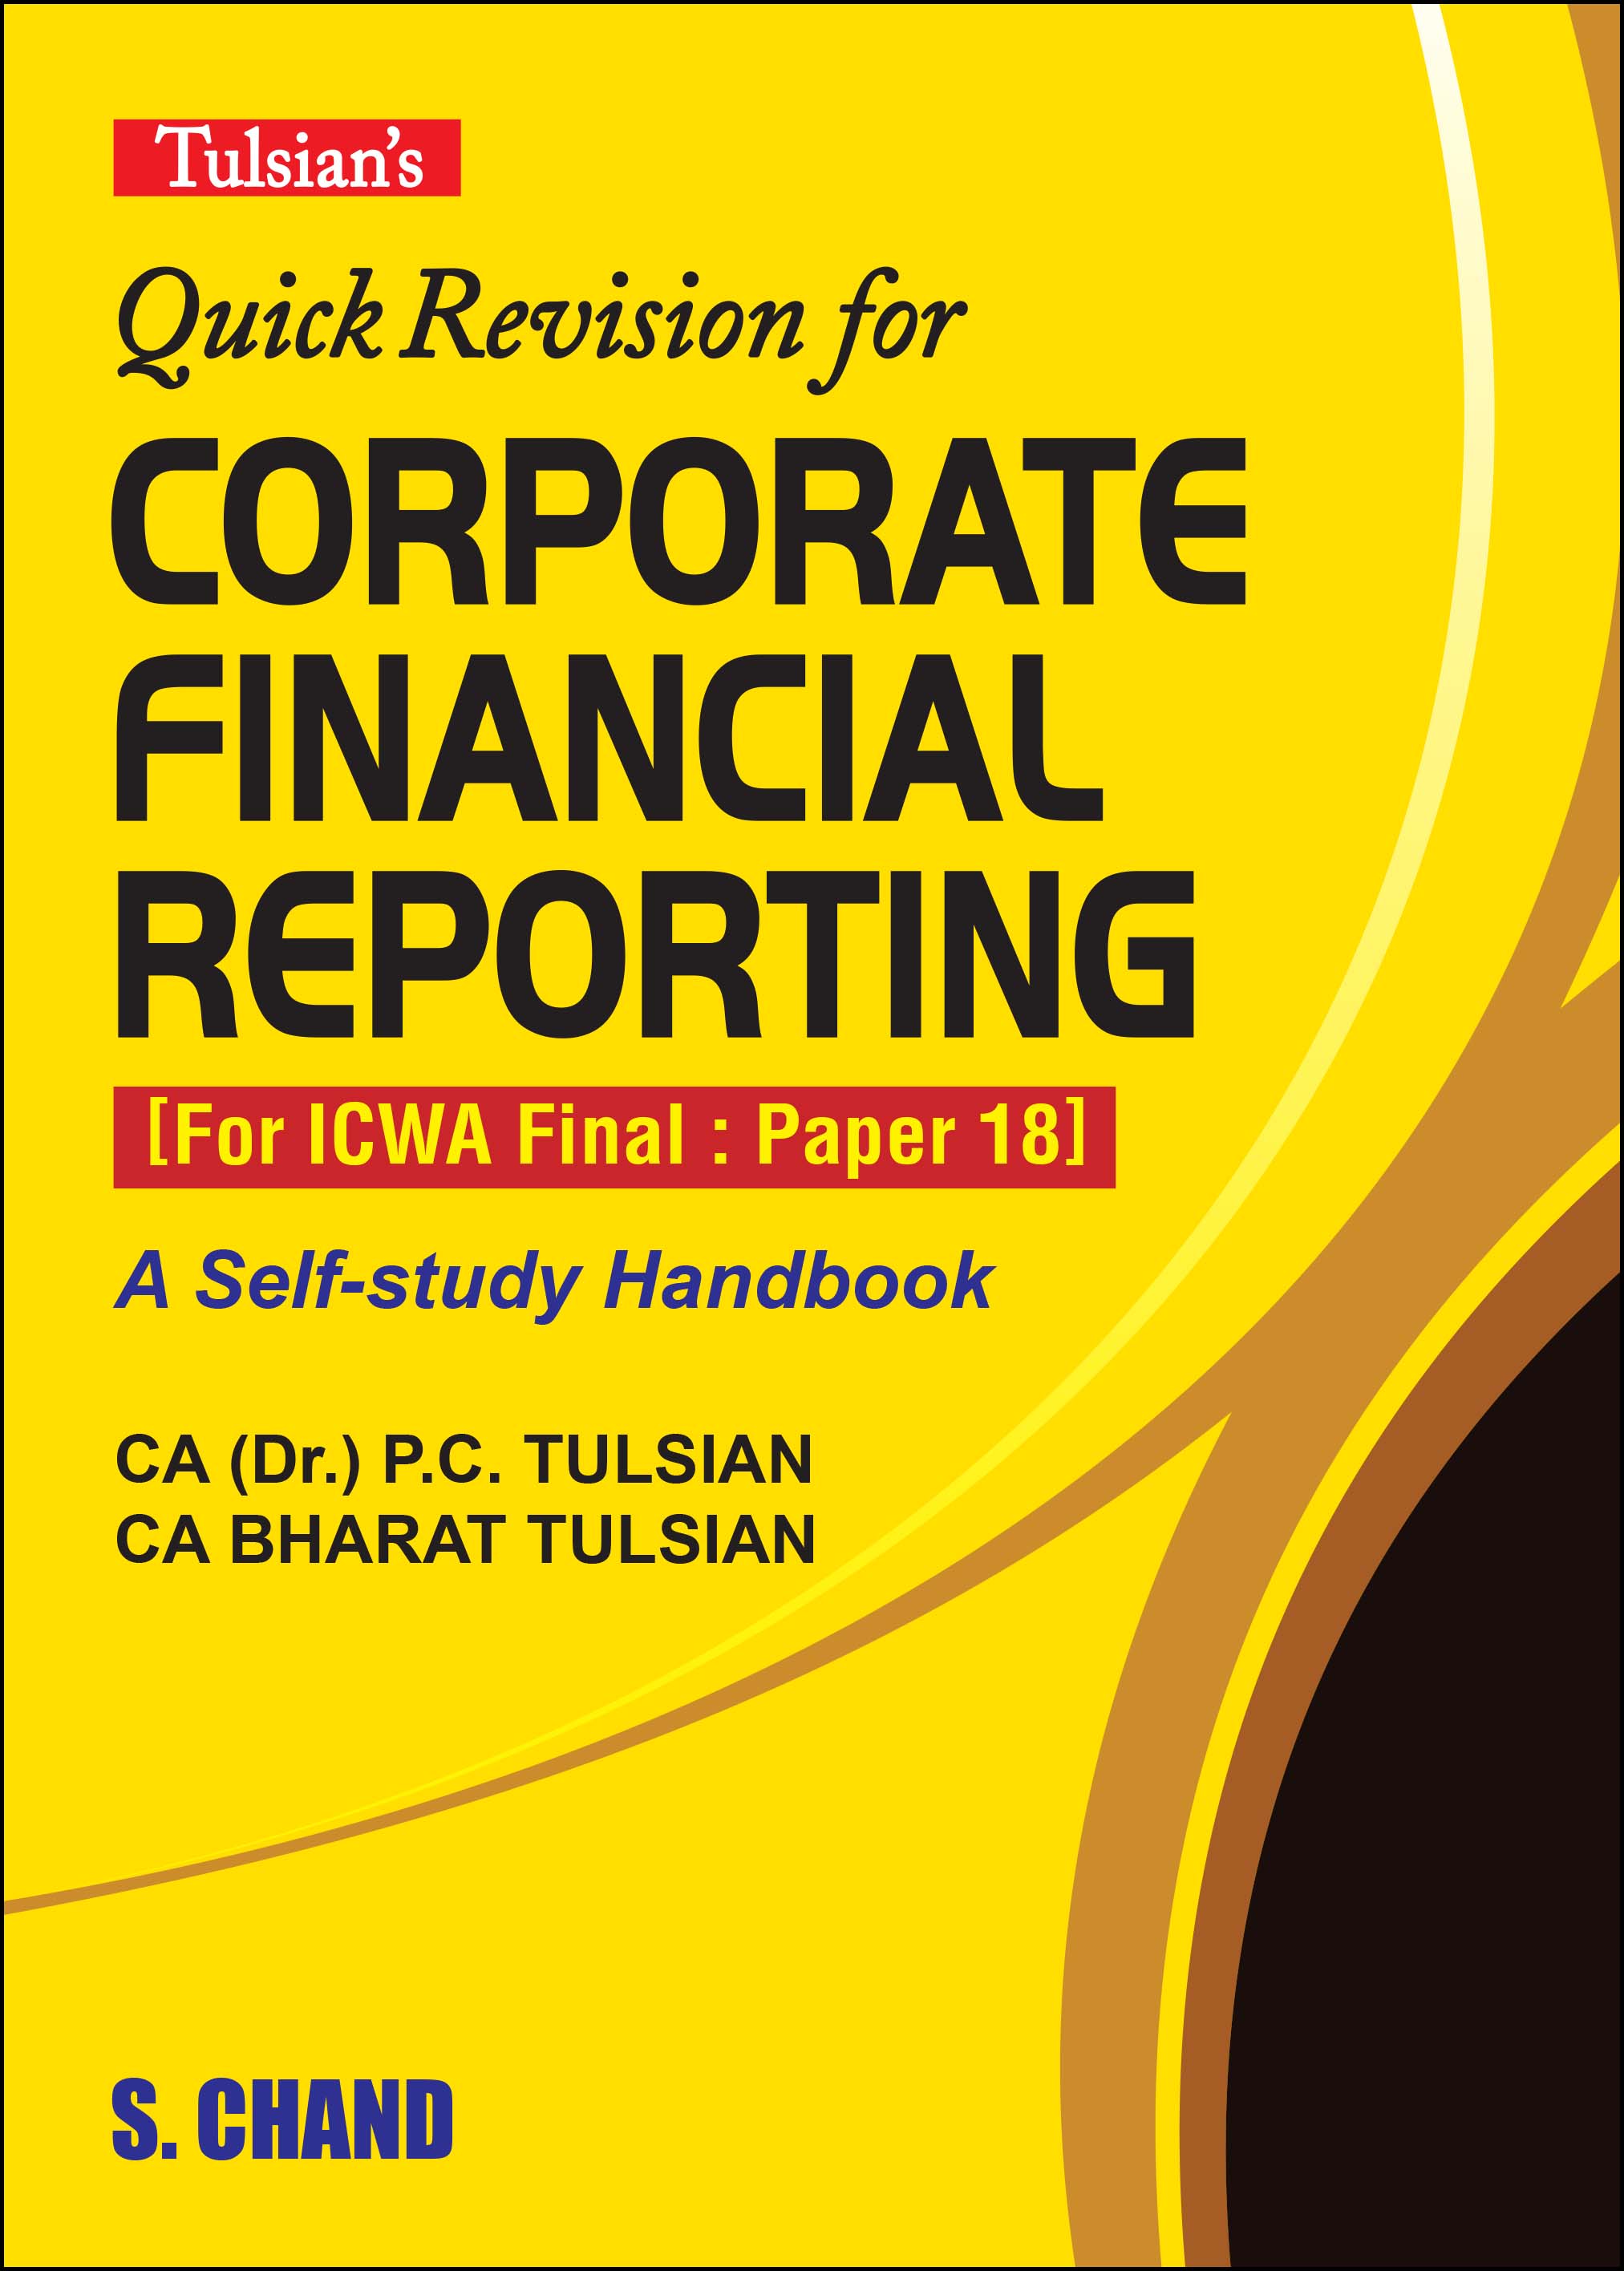 TULSIAN’S QUICK REVISION FOR CORPORATE FINANCIAL REPORTING